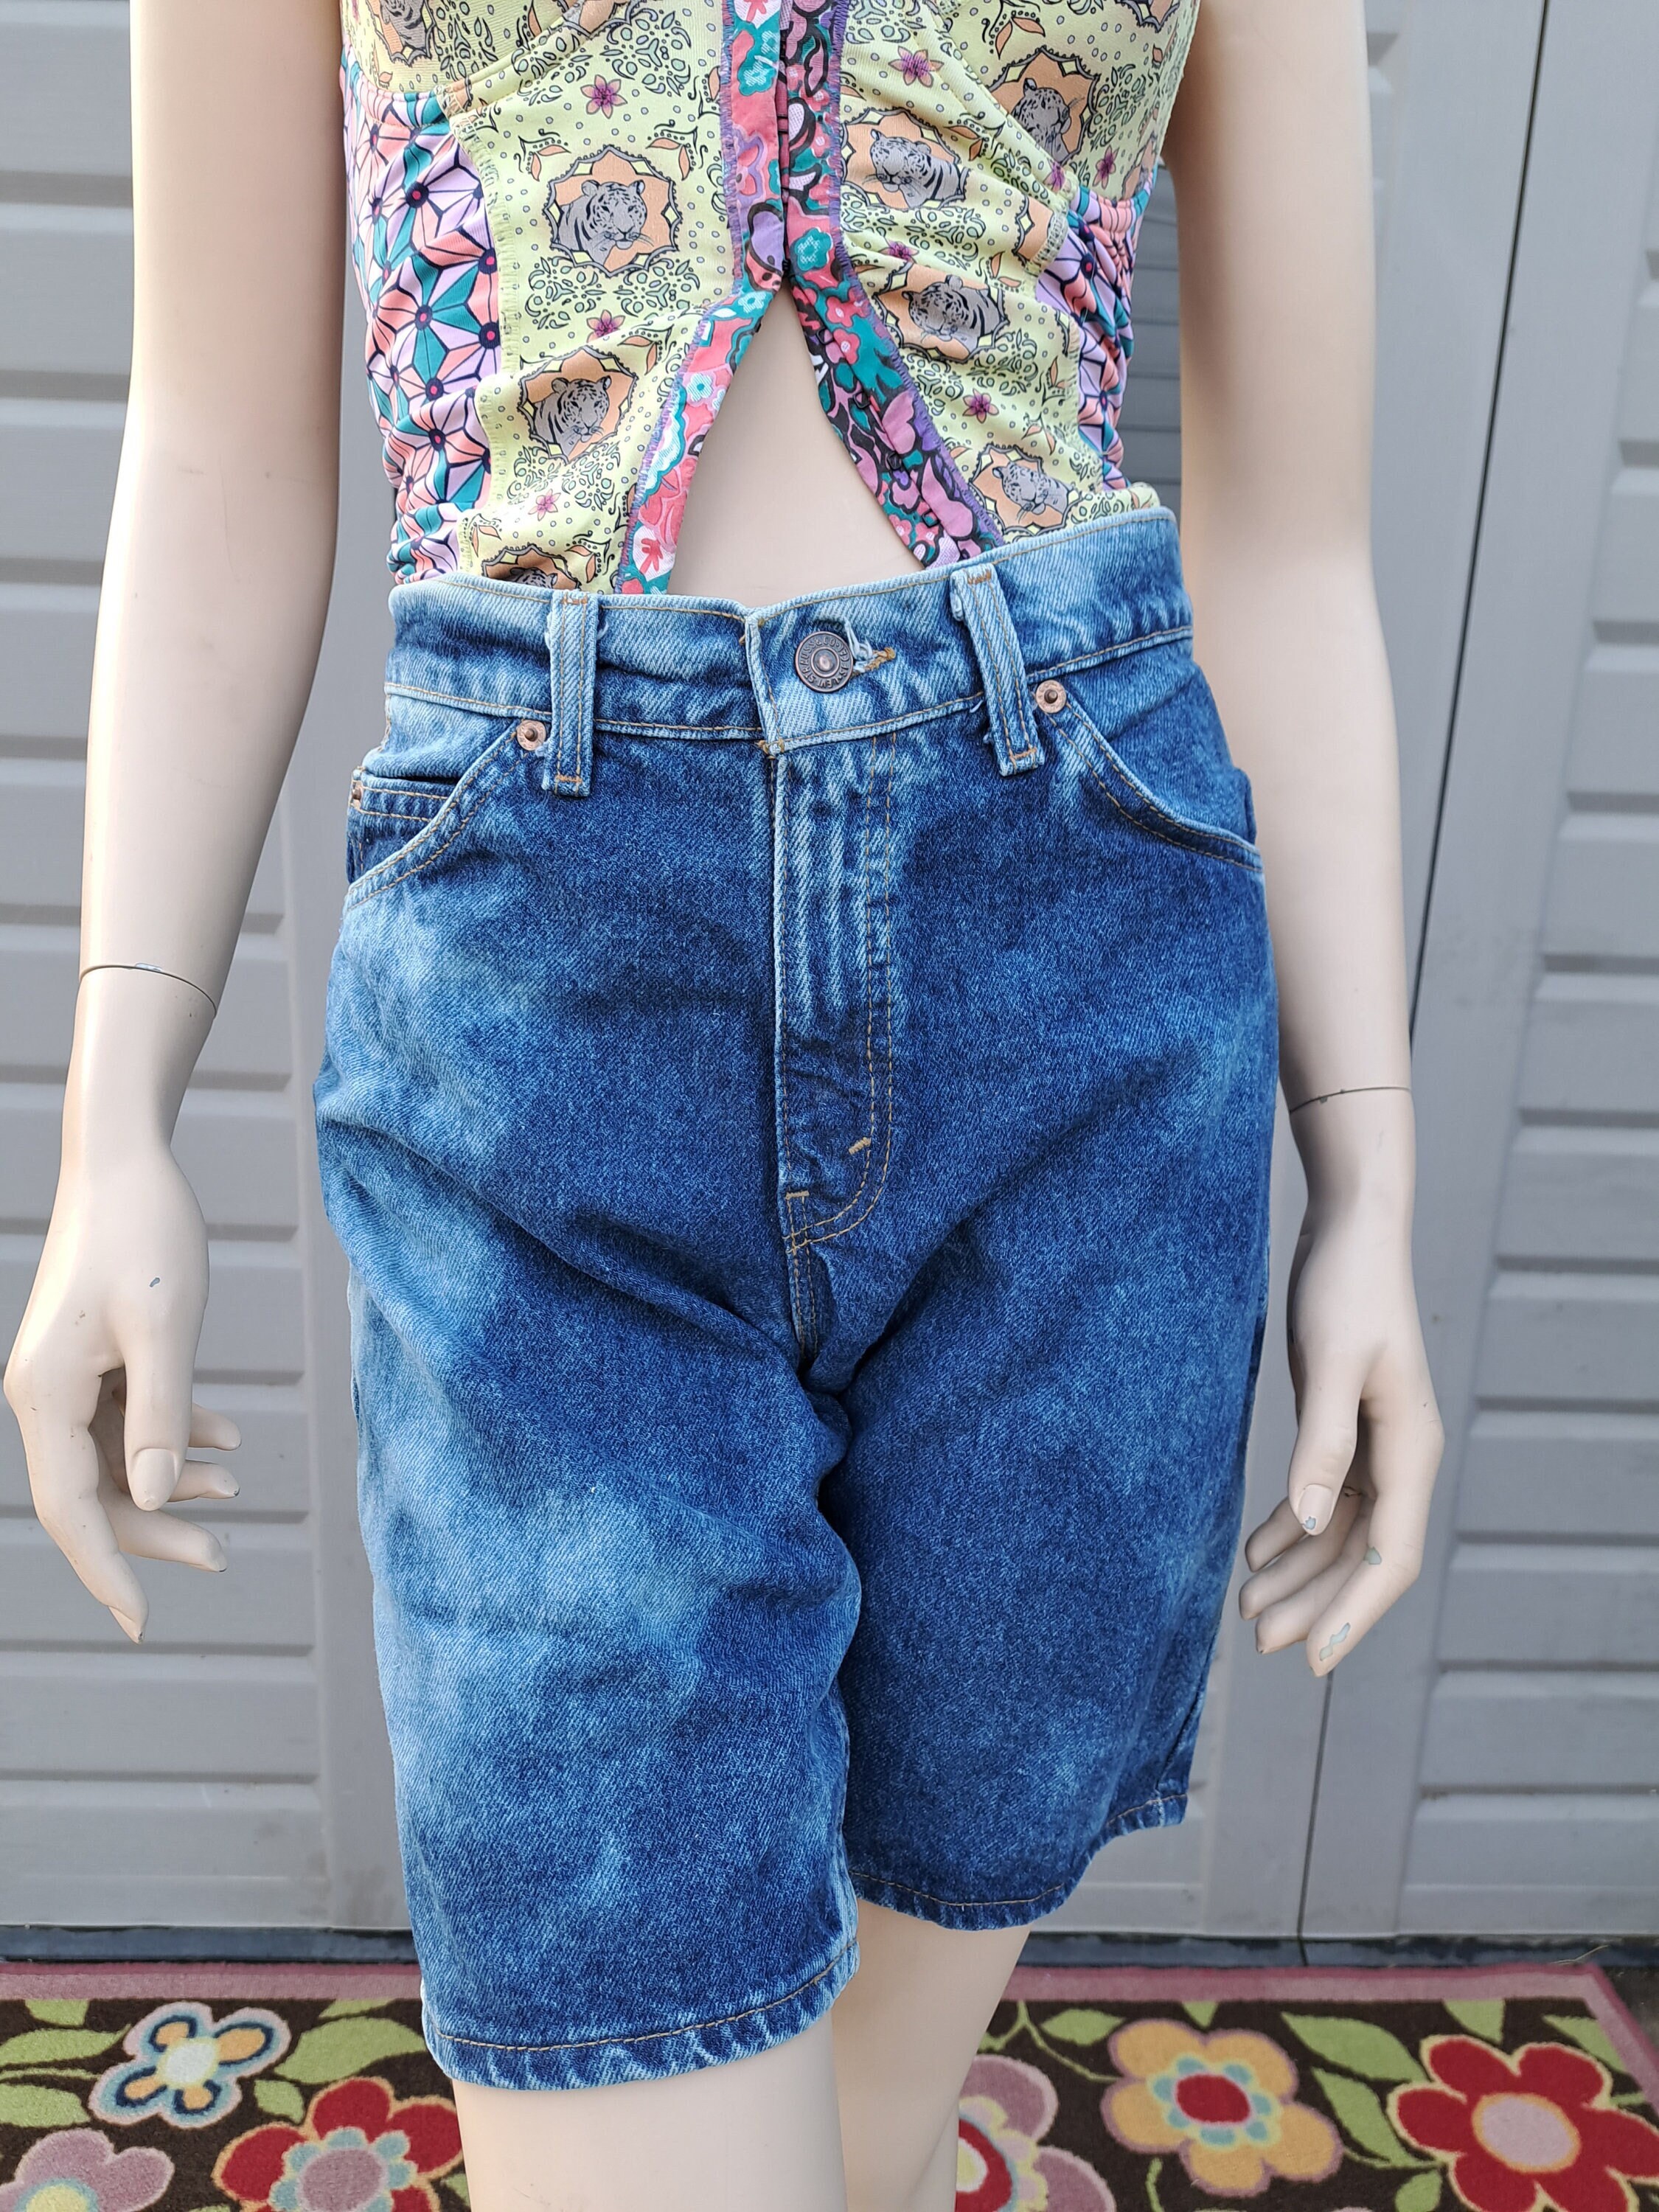 ALL SIZES Cut off LEVI'S Vintage High Waisted Shorts Plus Sizes 